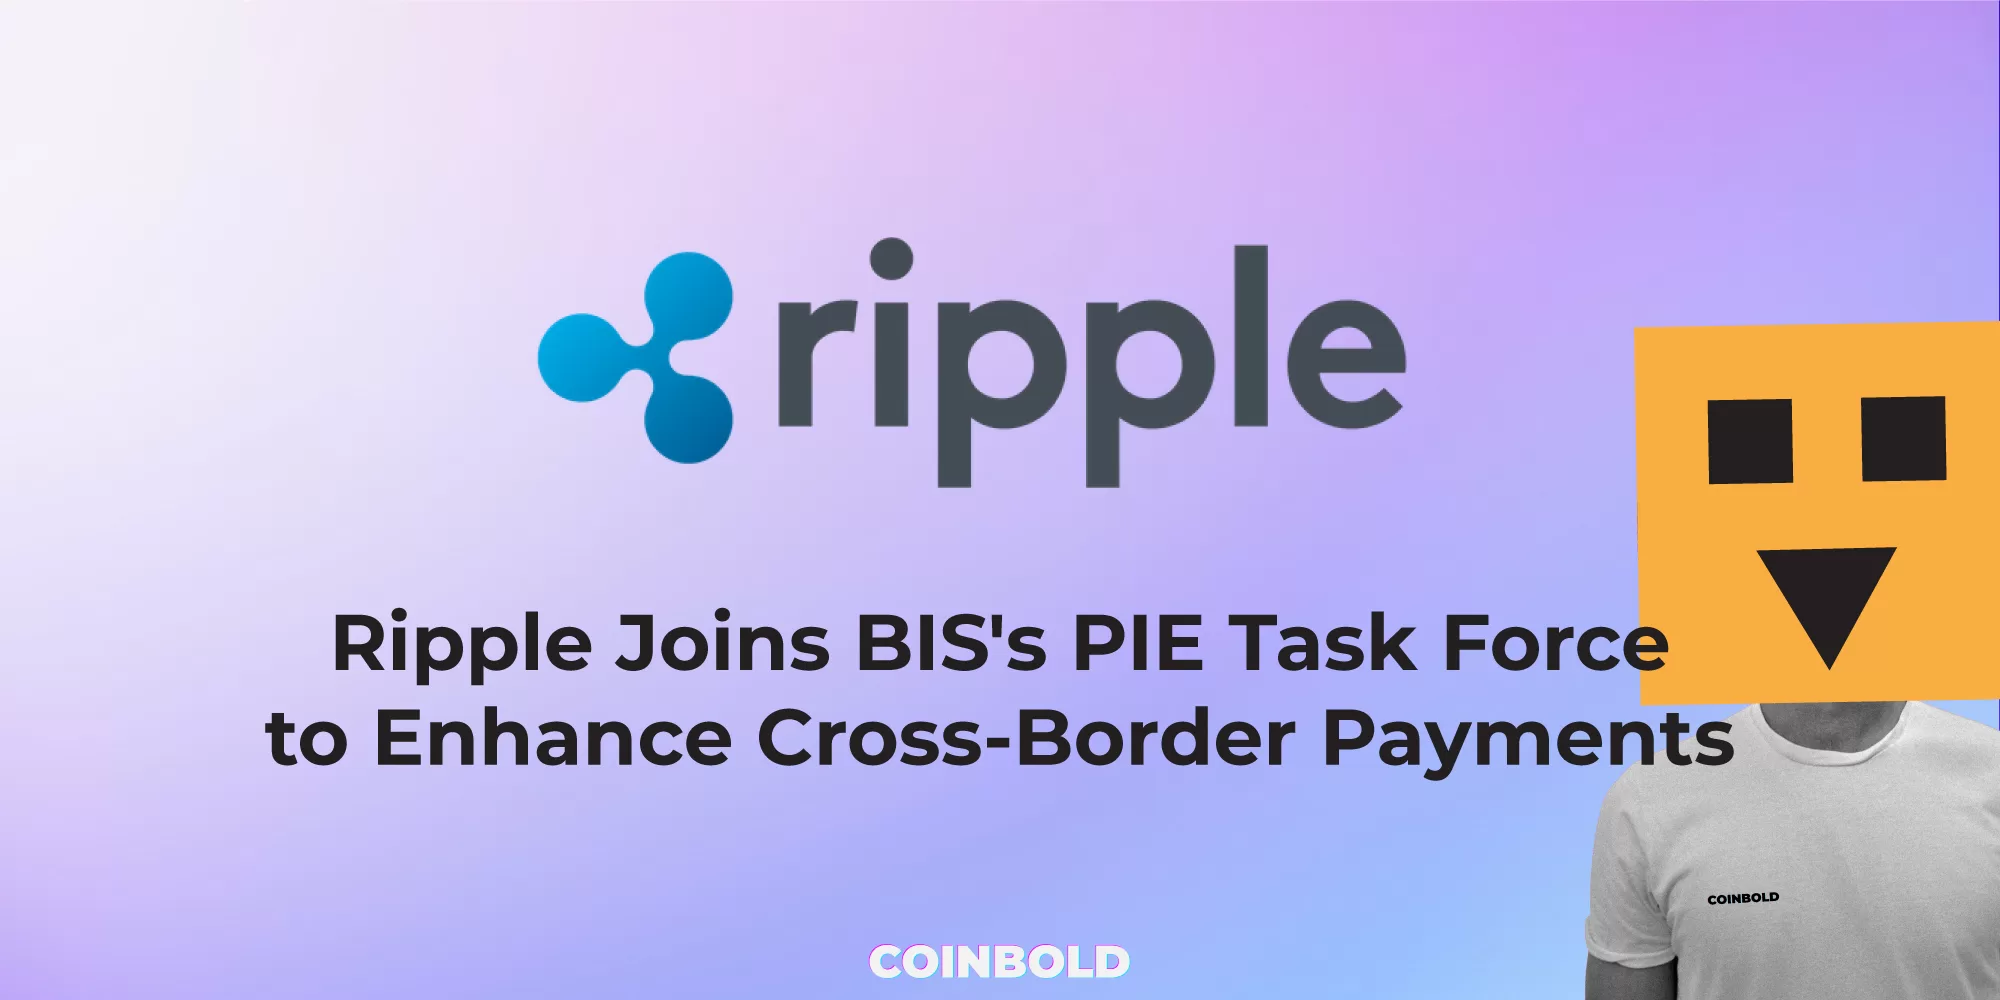 Ripple Joins BIS's PIE Task Force to Enhance Cross Border Payments